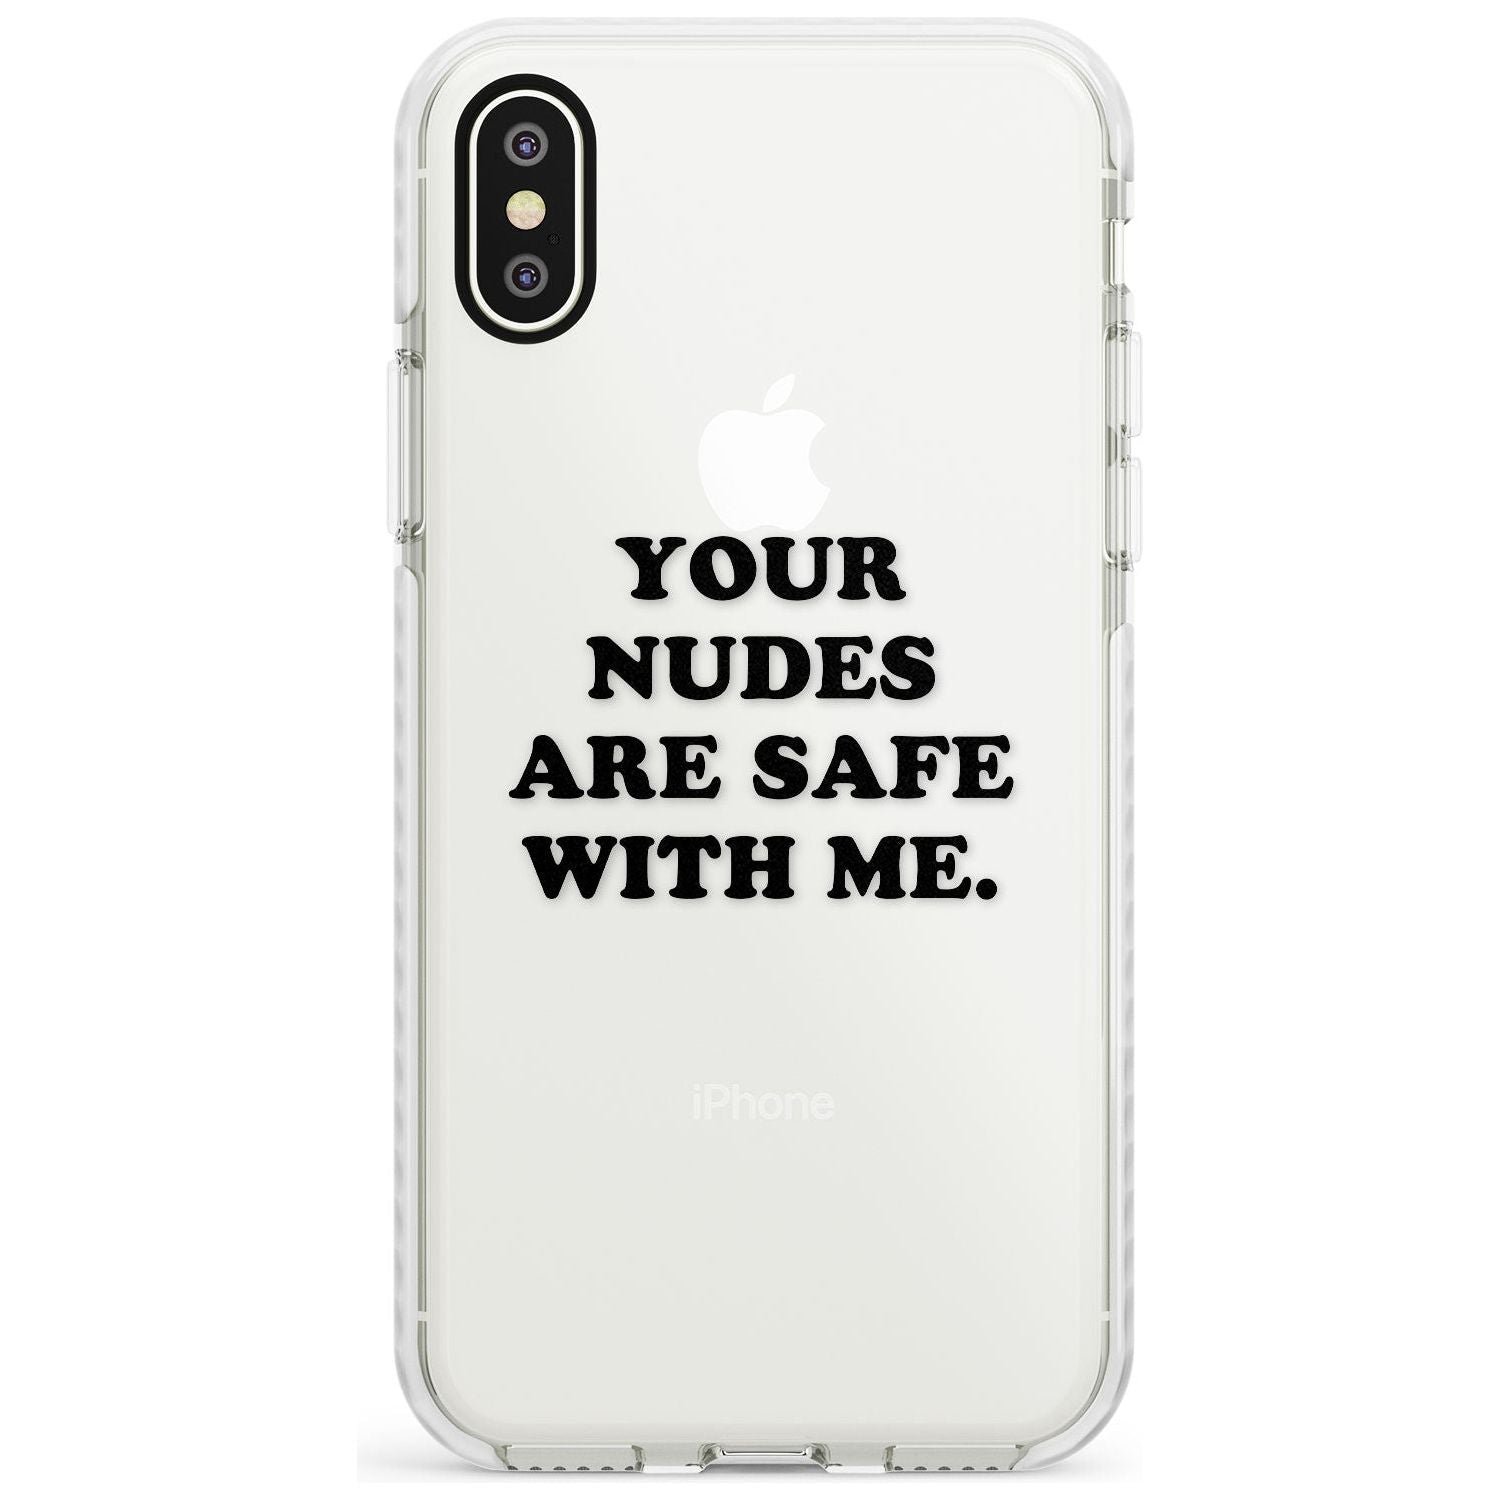 Your nudes are safe with me... BLACK Impact Phone Case for iPhone X XS Max XR